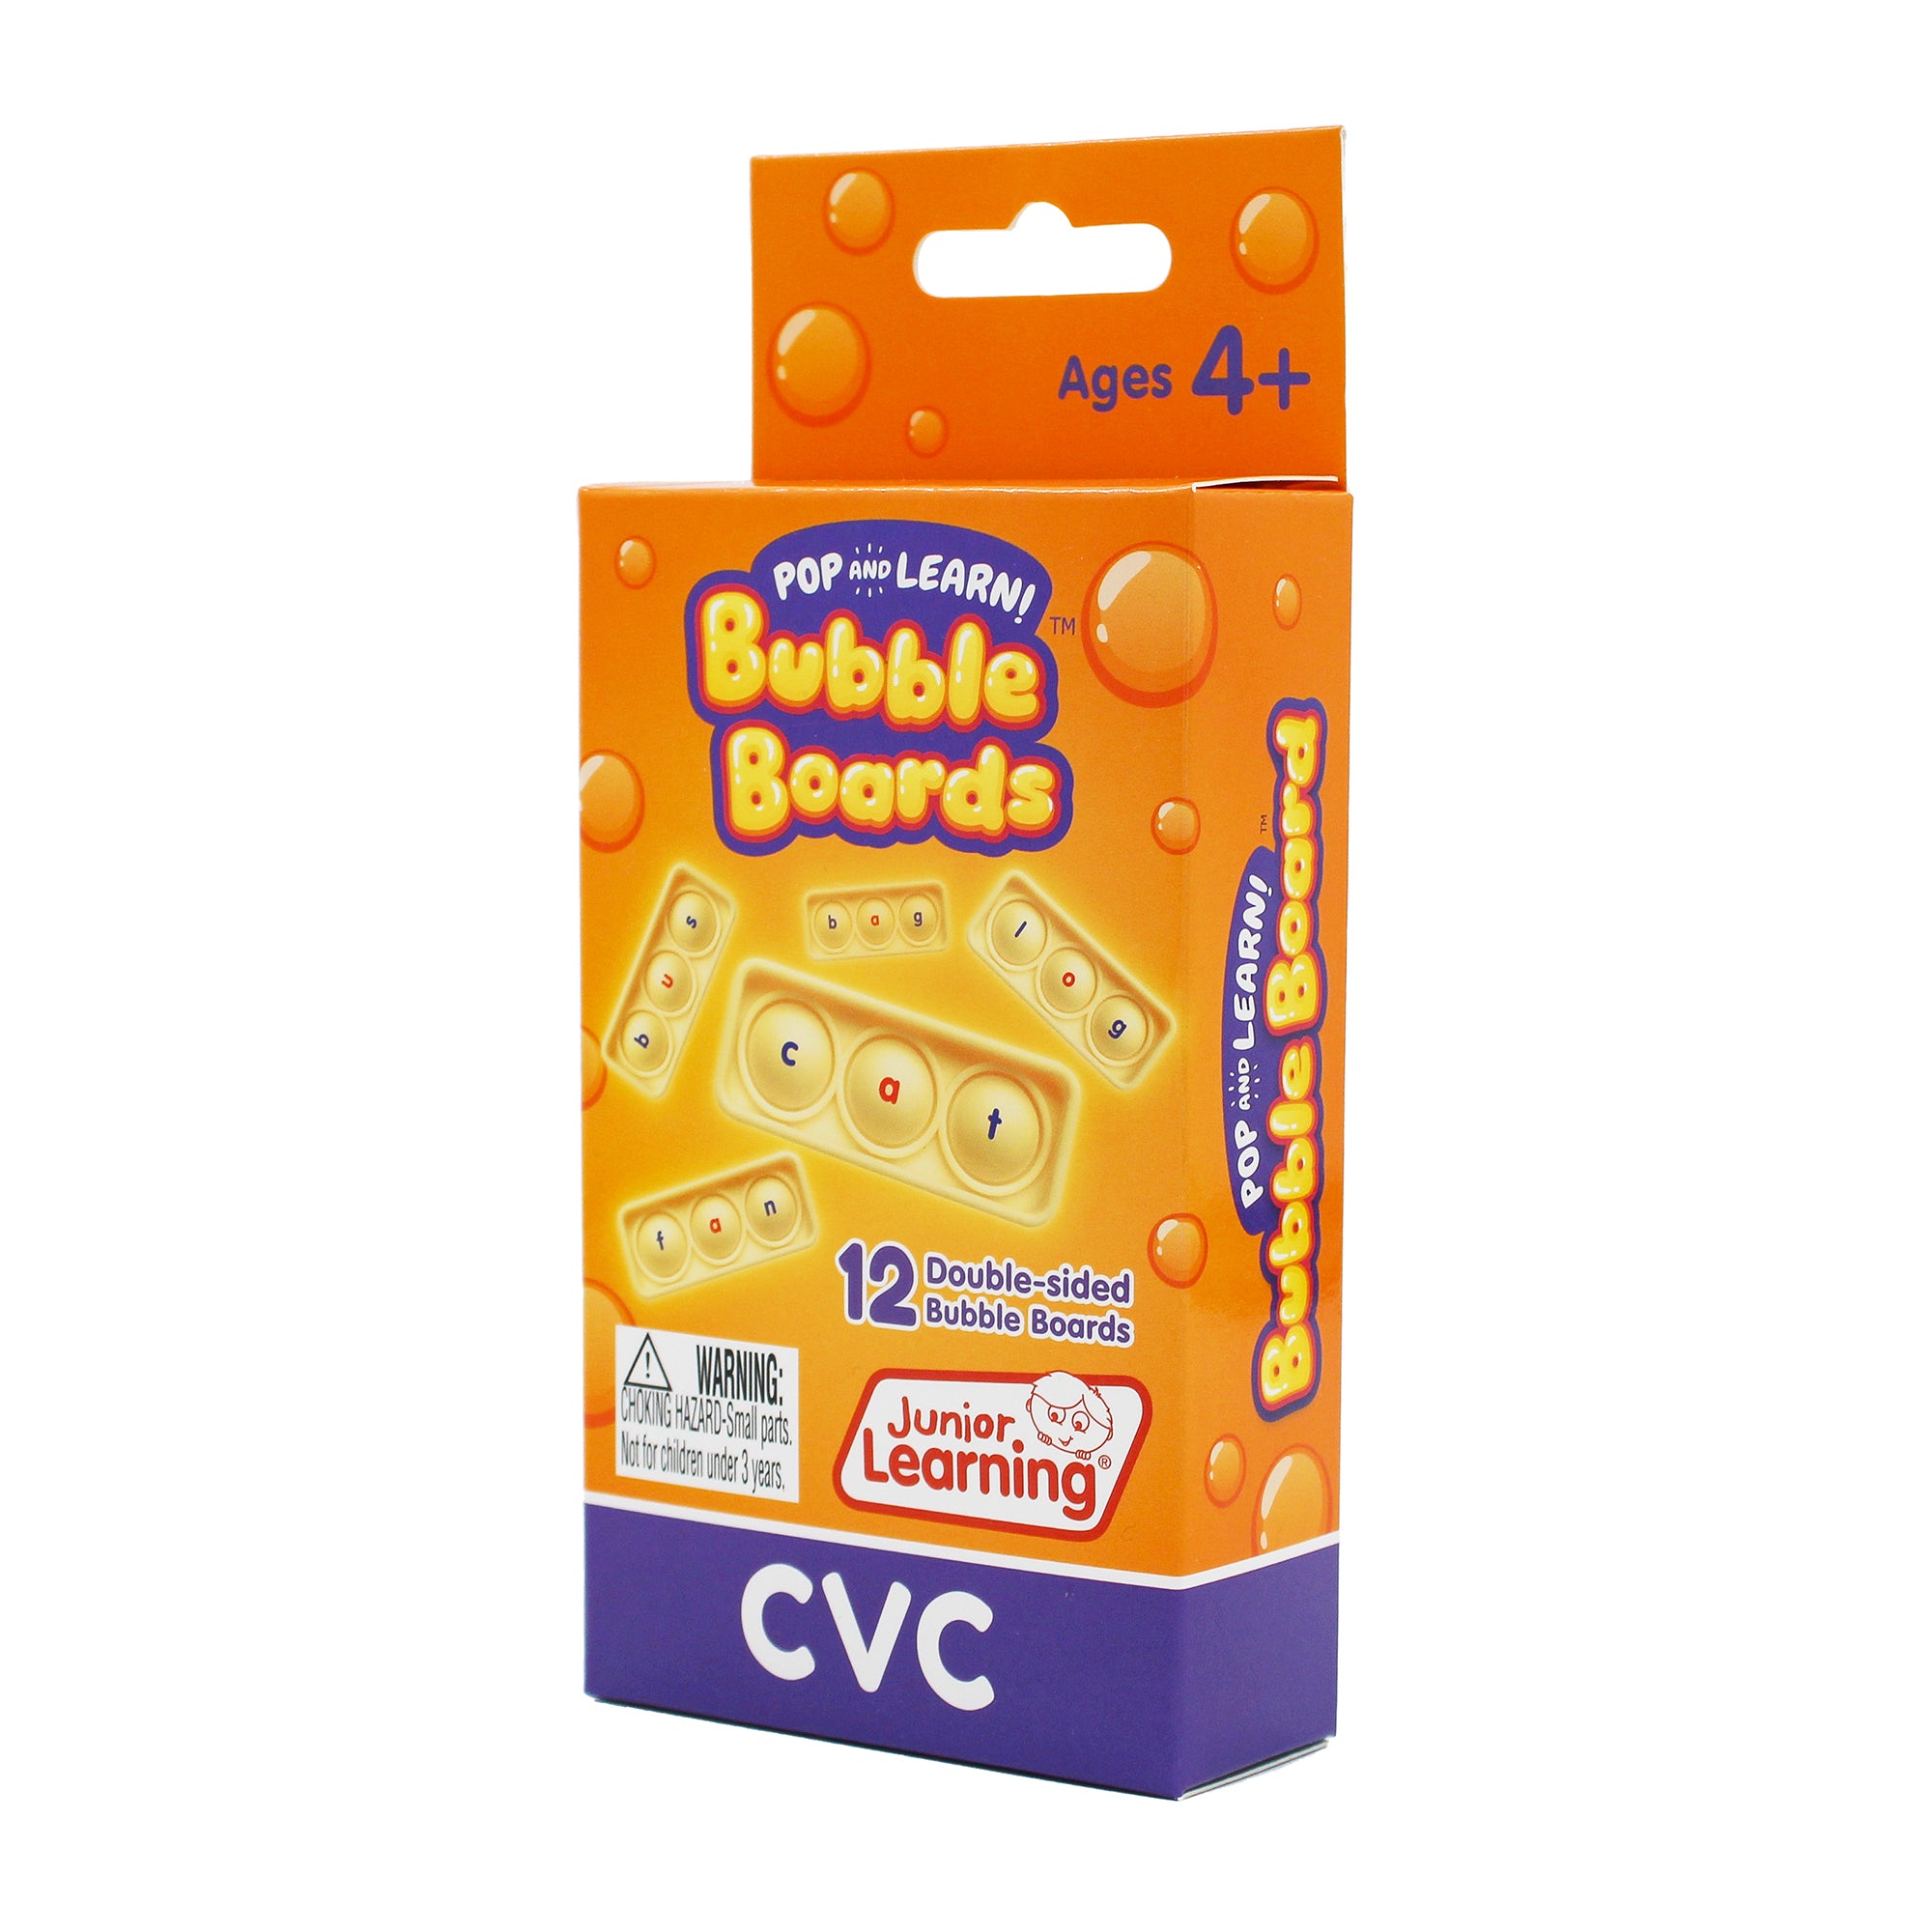 CVC Bubble Boards: Interactive Phonics Game for Kids Ages 4+